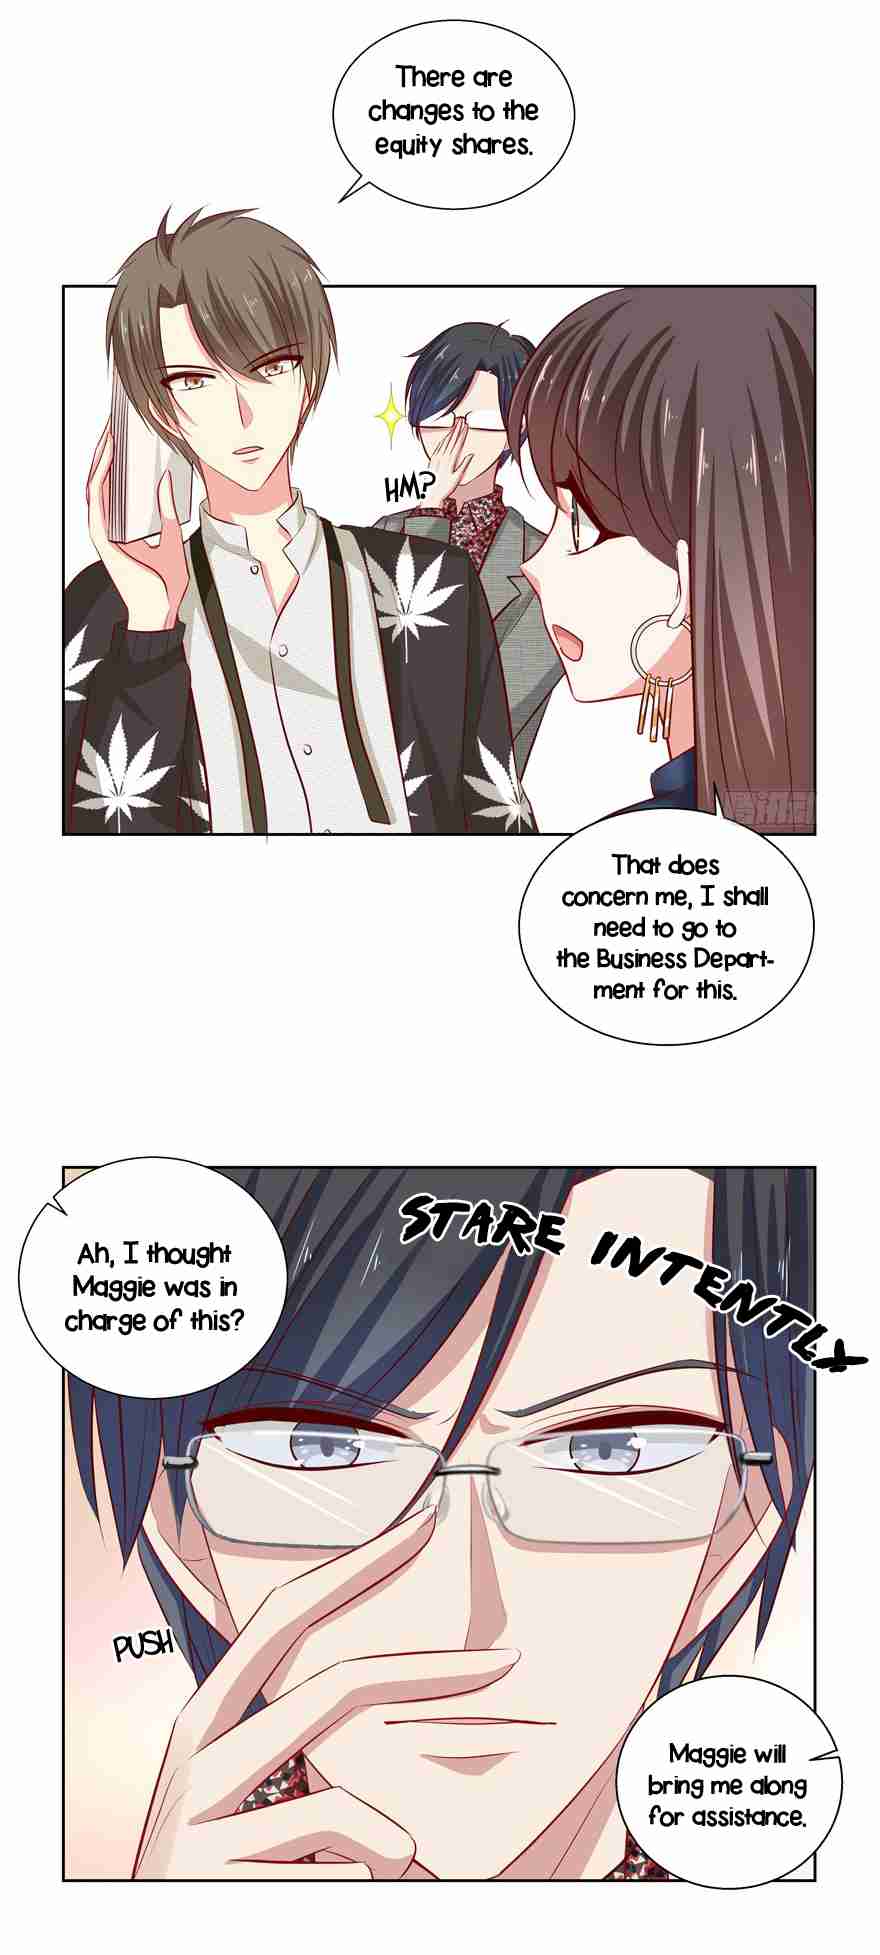 Reluctant To Go Ch. 41 Honeymoon period? 3rd wheel